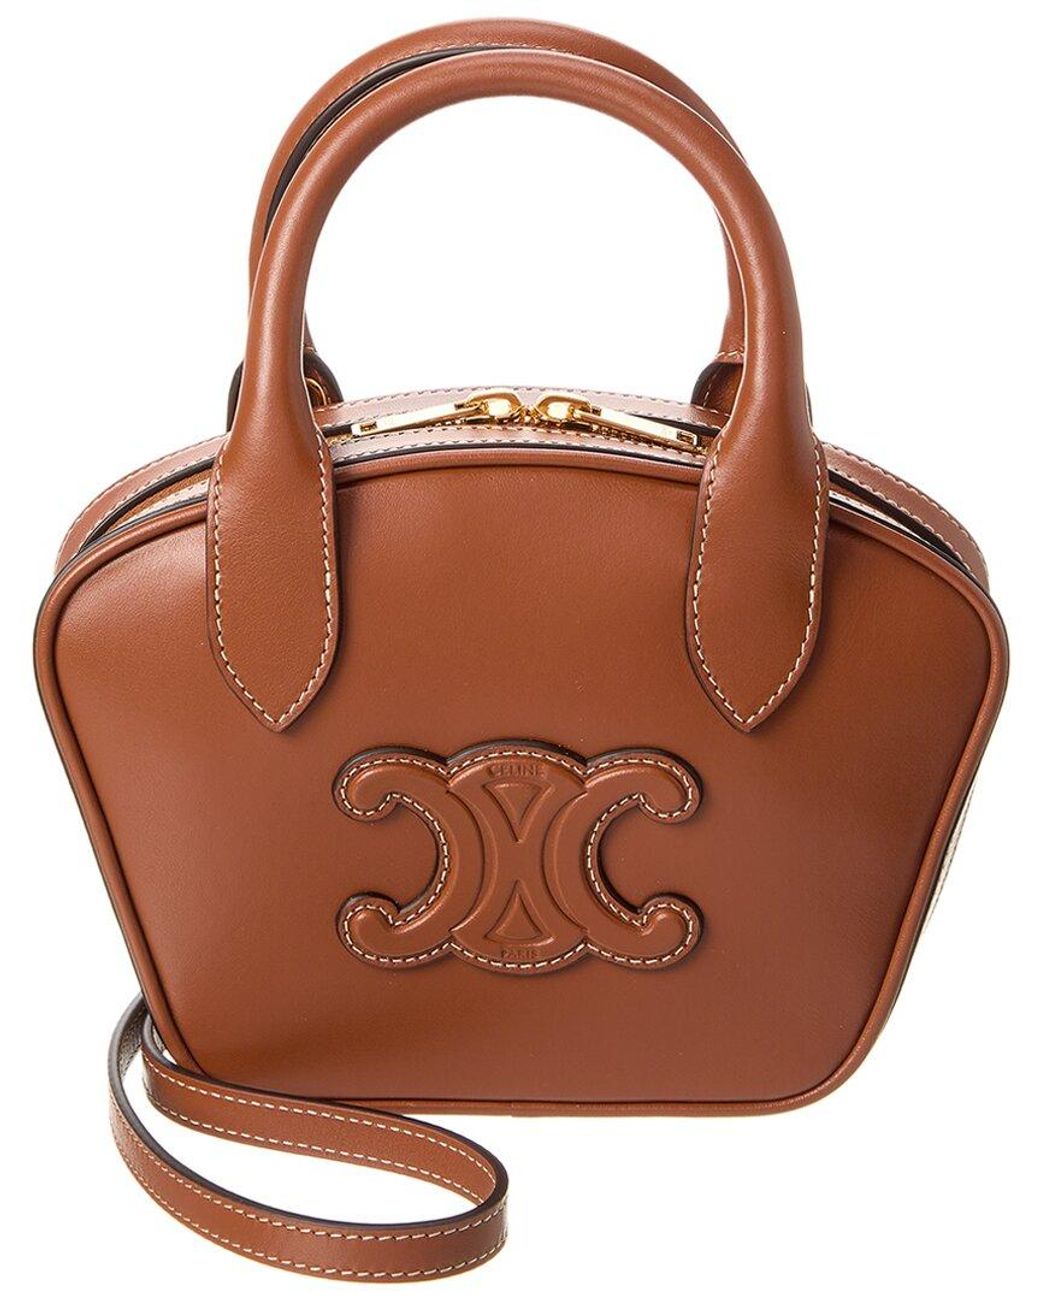 Celine Triomphe Mini Leather Bowling Bag in Brown | Lyst